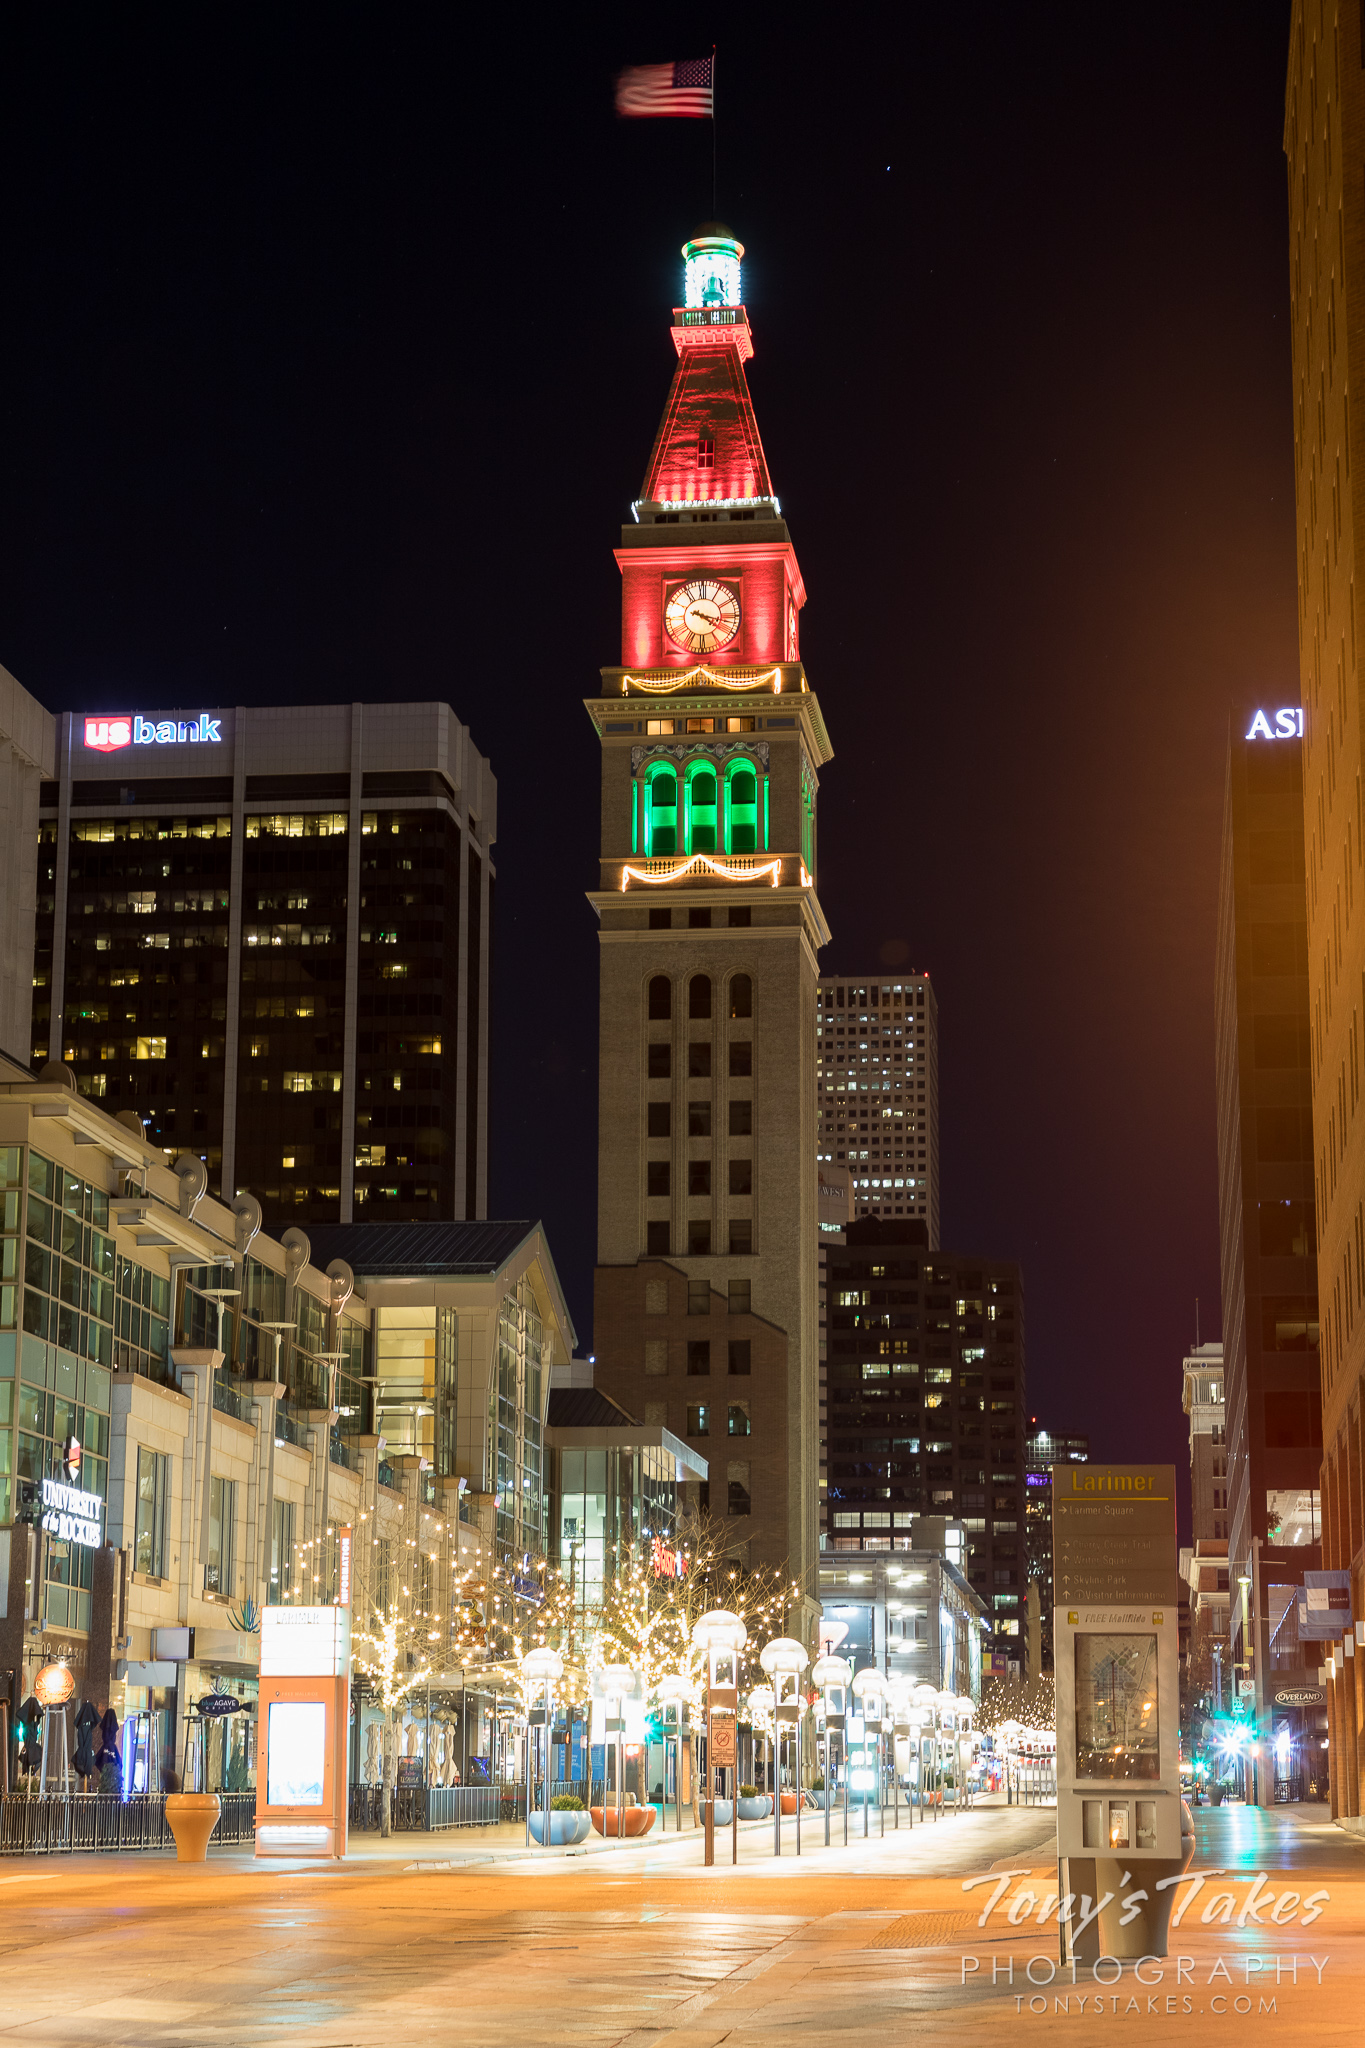 Denver's 16th Street Mall and the Daniels and Fisher Tower in holiday lights. (© Tony’s Takes)